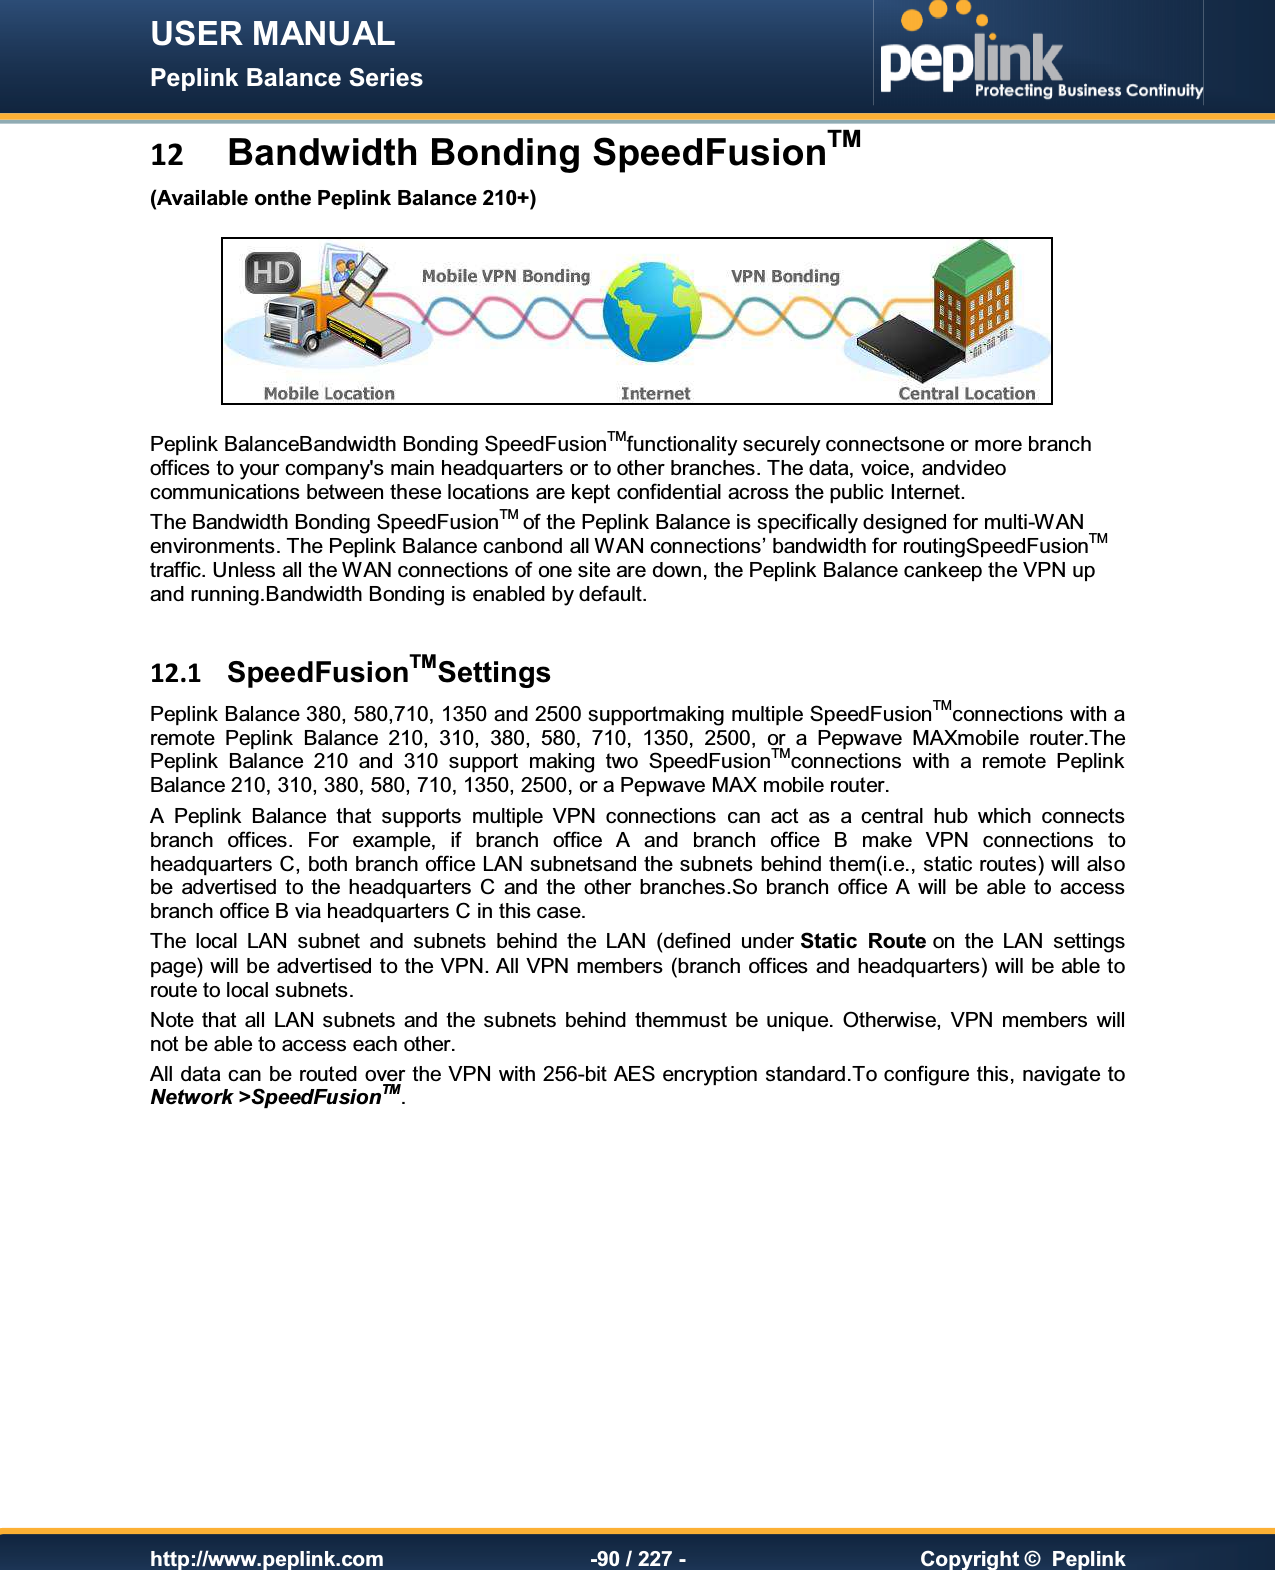 USER MANUAL Peplink Balance Series   http://www.peplink.com -90 / 227 -  Copyright ©  Peplink 12 Bandwidth Bonding SpeedFusionTM (Available onthe Peplink Balance 210+)  Peplink BalanceBandwidth Bonding SpeedFusionTMfunctionality securely connectsone or more branch offices to your company&apos;s main headquarters or to other branches. The data, voice, andvideo communications between these locations are kept confidential across the public Internet. The Bandwidth Bonding SpeedFusionTM of the Peplink Balance is specifically designed for multi-WAN environments. The Peplink Balance canbond all WAN connections’ bandwidth for routingSpeedFusionTM traffic. Unless all the WAN connections of one site are down, the Peplink Balance cankeep the VPN up and running.Bandwidth Bonding is enabled by default.   12.1  SpeedFusionTMSettings Peplink Balance 380, 580,710, 1350 and 2500 supportmaking multiple SpeedFusionTMconnections with a remote  Peplink  Balance  210,  310,  380,  580, 710,  1350,  2500,  or  a  Pepwave  MAXmobile  router.The Peplink  Balance  210  and  310  support  making  two  SpeedFusionTMconnections  with  a  remote  Peplink Balance 210, 310, 380, 580, 710, 1350, 2500, or a Pepwave MAX mobile router. A  Peplink  Balance  that  supports  multiple  VPN  connections  can  act  as  a  central  hub  which  connects branch  offices.  For  example,  if  branch  office  A  and  branch  office  B  make  VPN  connections  to headquarters C, both branch office LAN subnetsand the subnets behind them(i.e., static routes) will also be  advertised  to the  headquarters  C  and  the  other branches.So  branch  office A  will be  able to  access branch office B via headquarters C in this case. The  local  LAN  subnet  and  subnets  behind  the  LAN  (defined  under Static  Route on  the  LAN  settings page) will be advertised to the VPN. All VPN members (branch offices and headquarters) will be able to route to local subnets. Note  that  all  LAN subnets  and  the subnets  behind  themmust be  unique.  Otherwise,  VPN members  will not be able to access each other. All data can be routed over the VPN with 256-bit AES encryption standard.To configure this, navigate to Network &gt;SpeedFusionTM.  